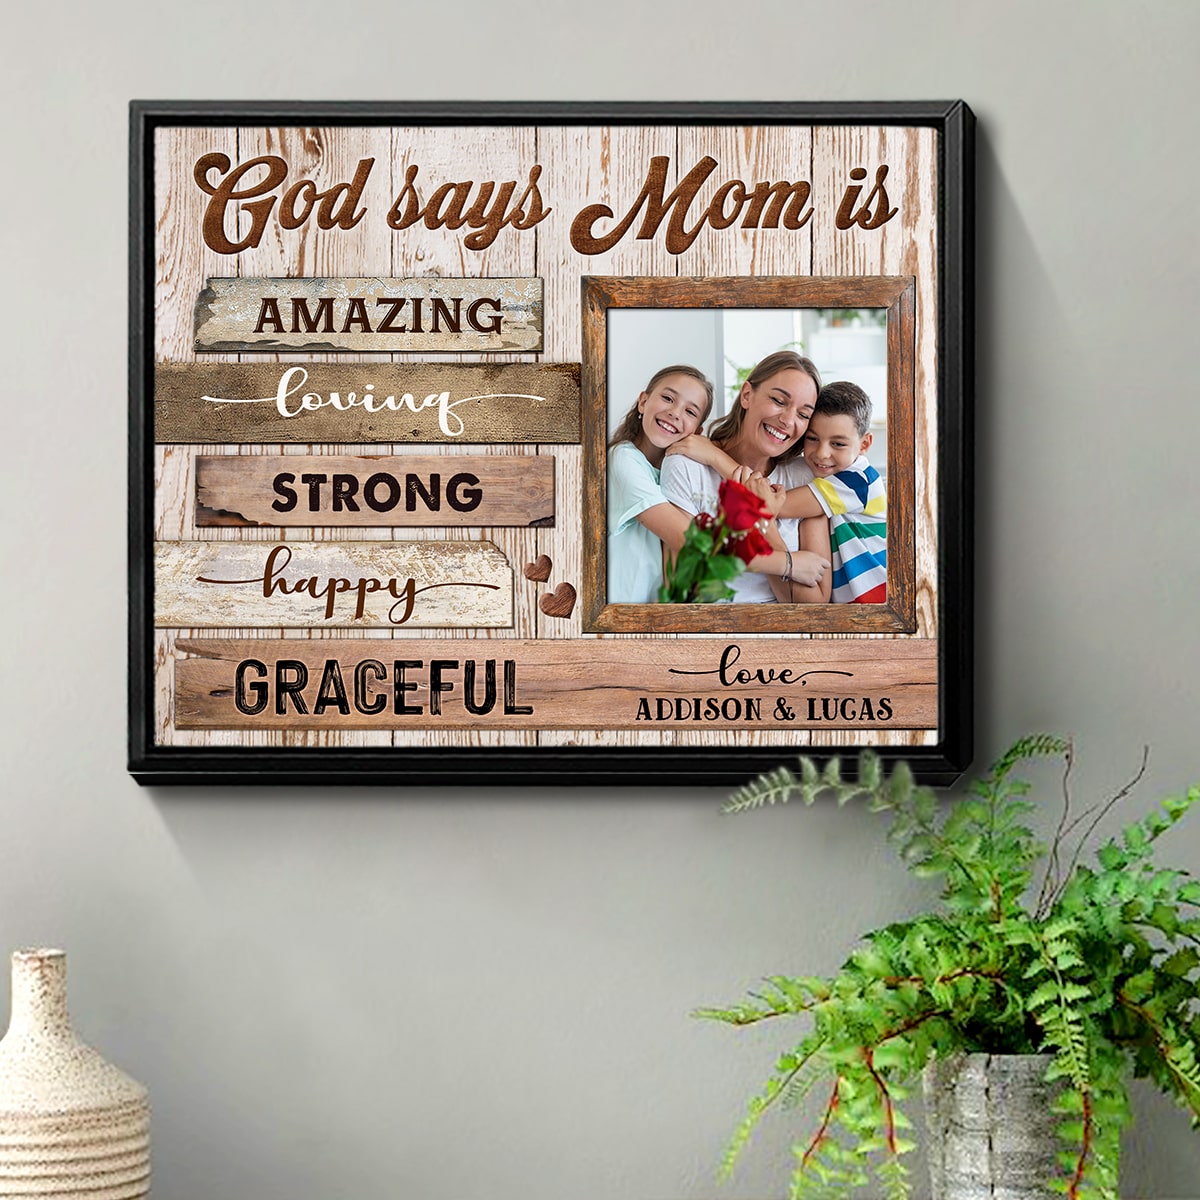 https://images.ohcanvas.com/ohcanvas_com/2023/02/20022939/mothers-day-gift-idea-best-gift-for-mom-with-amazing-quote-01.jpg